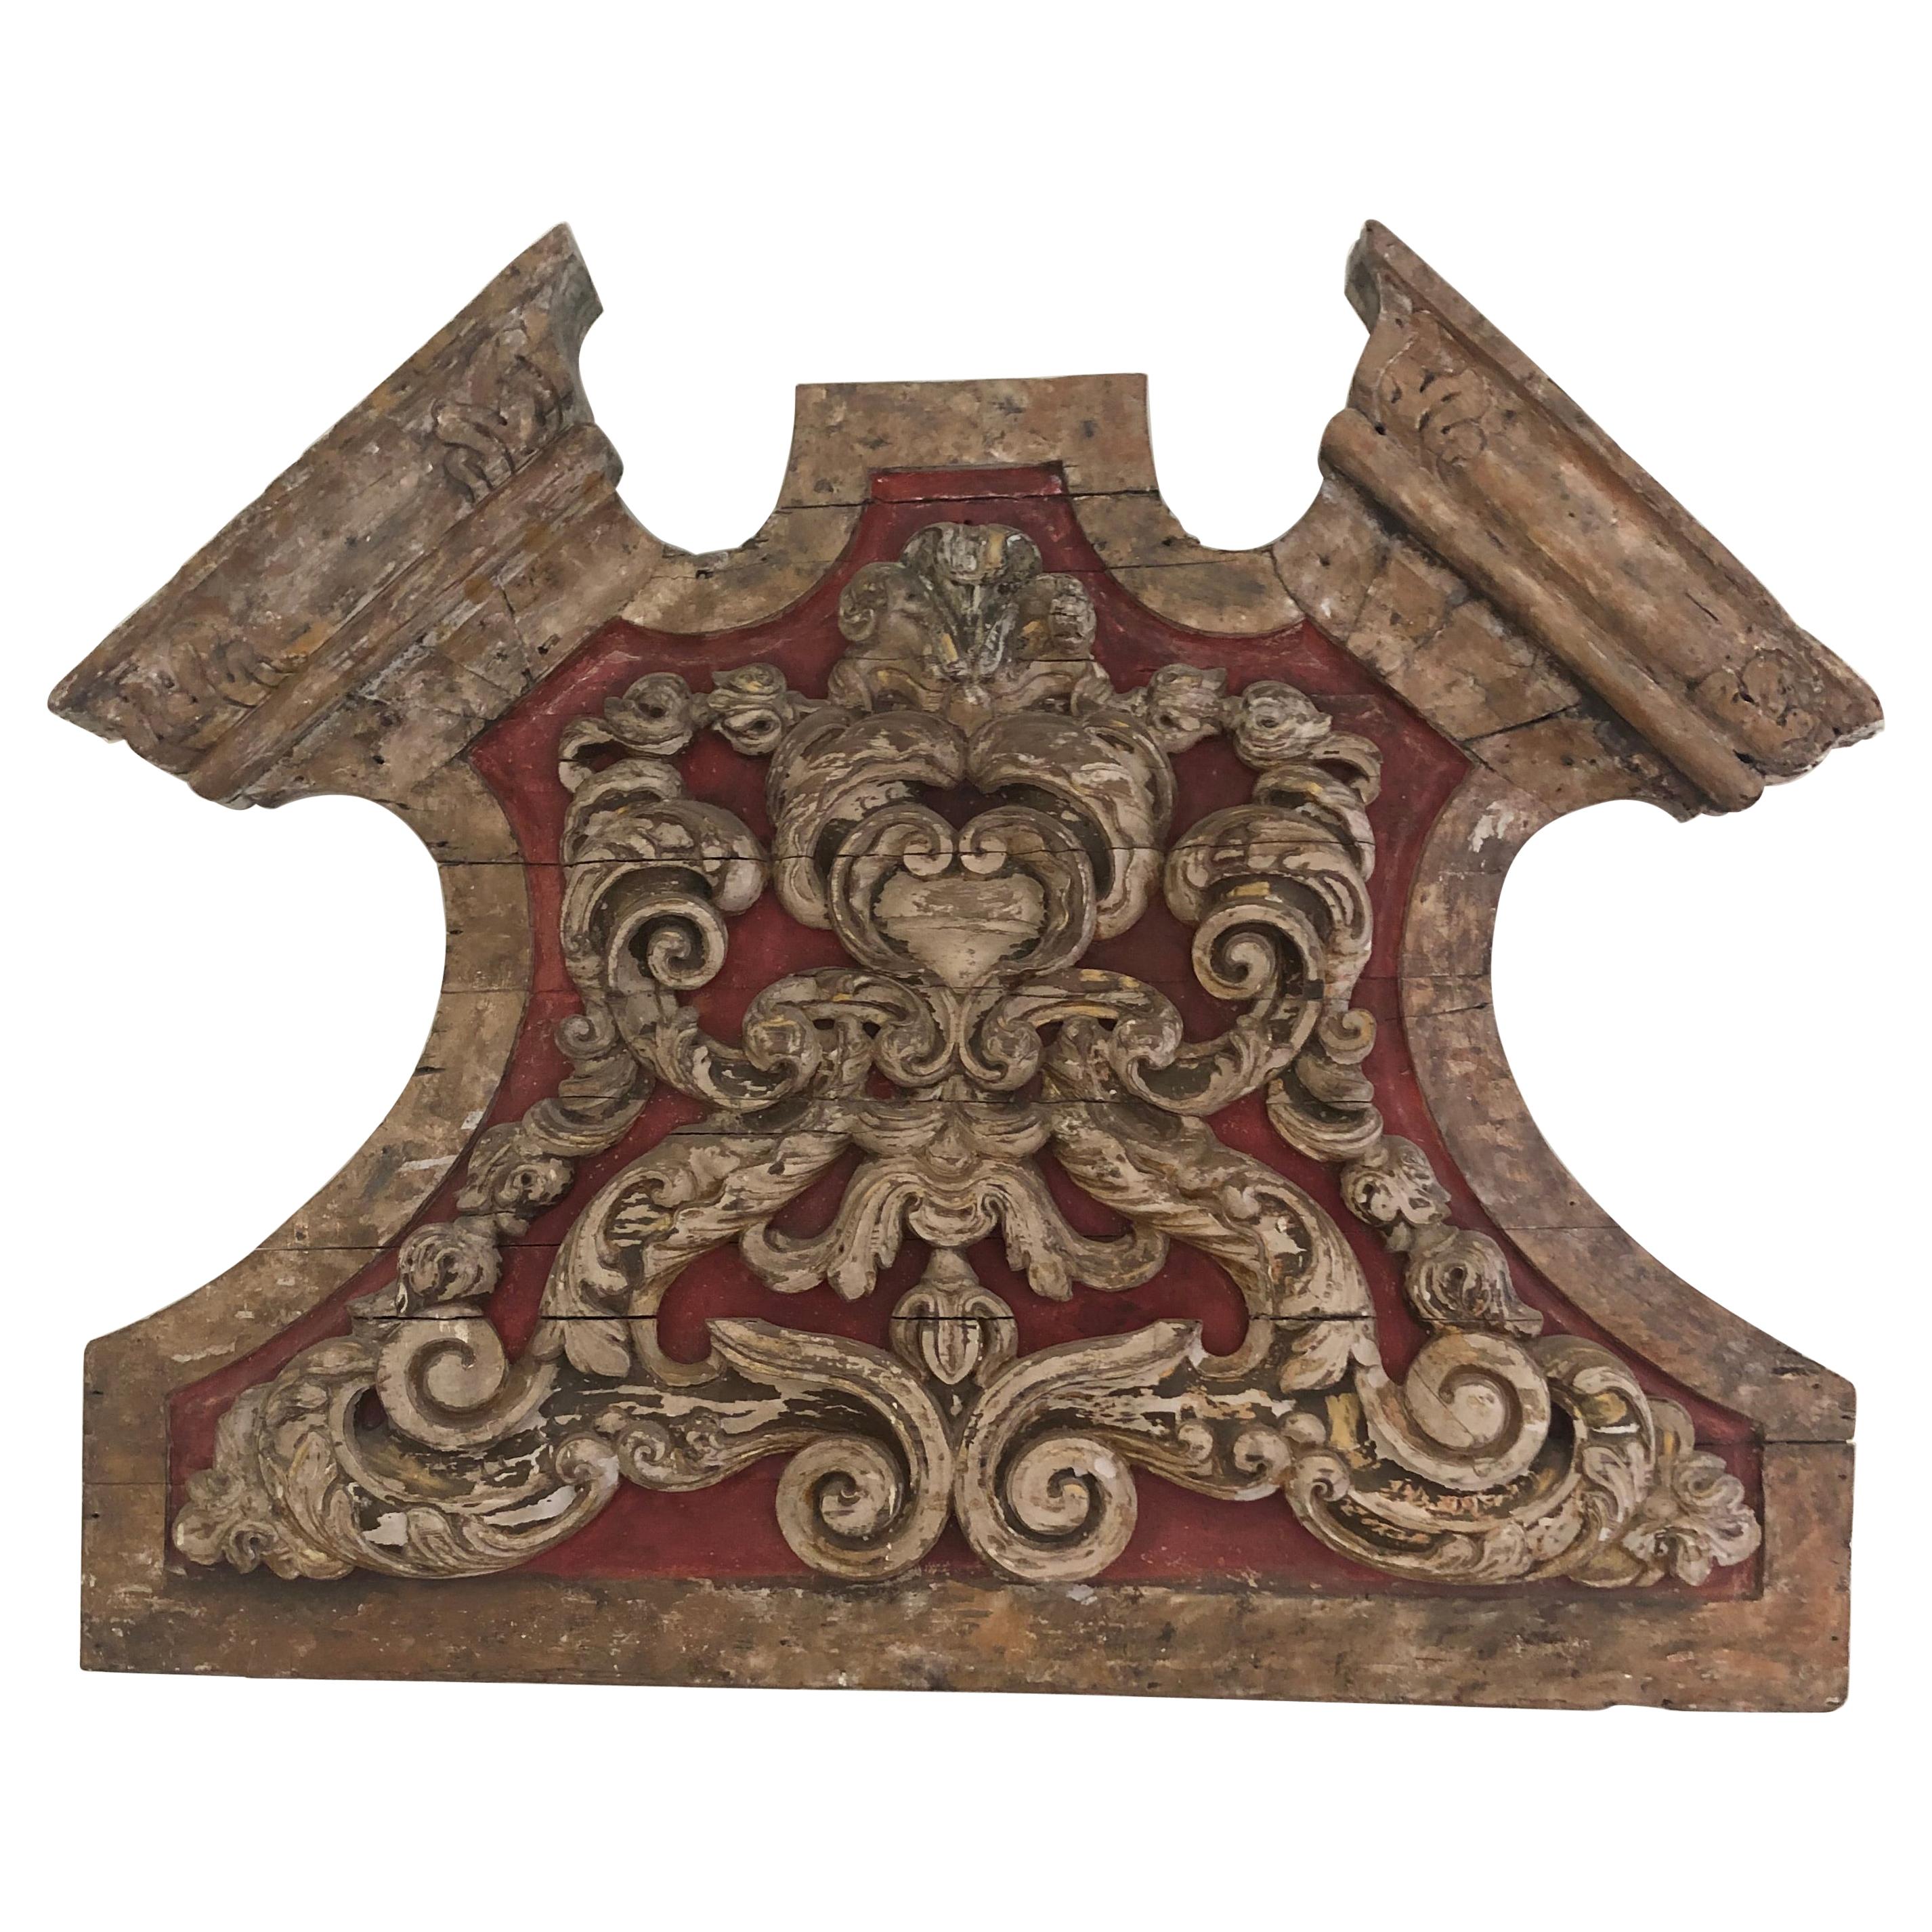 Monumental One of a Kind 19th Century Architectural Fragment Wall Sculpture